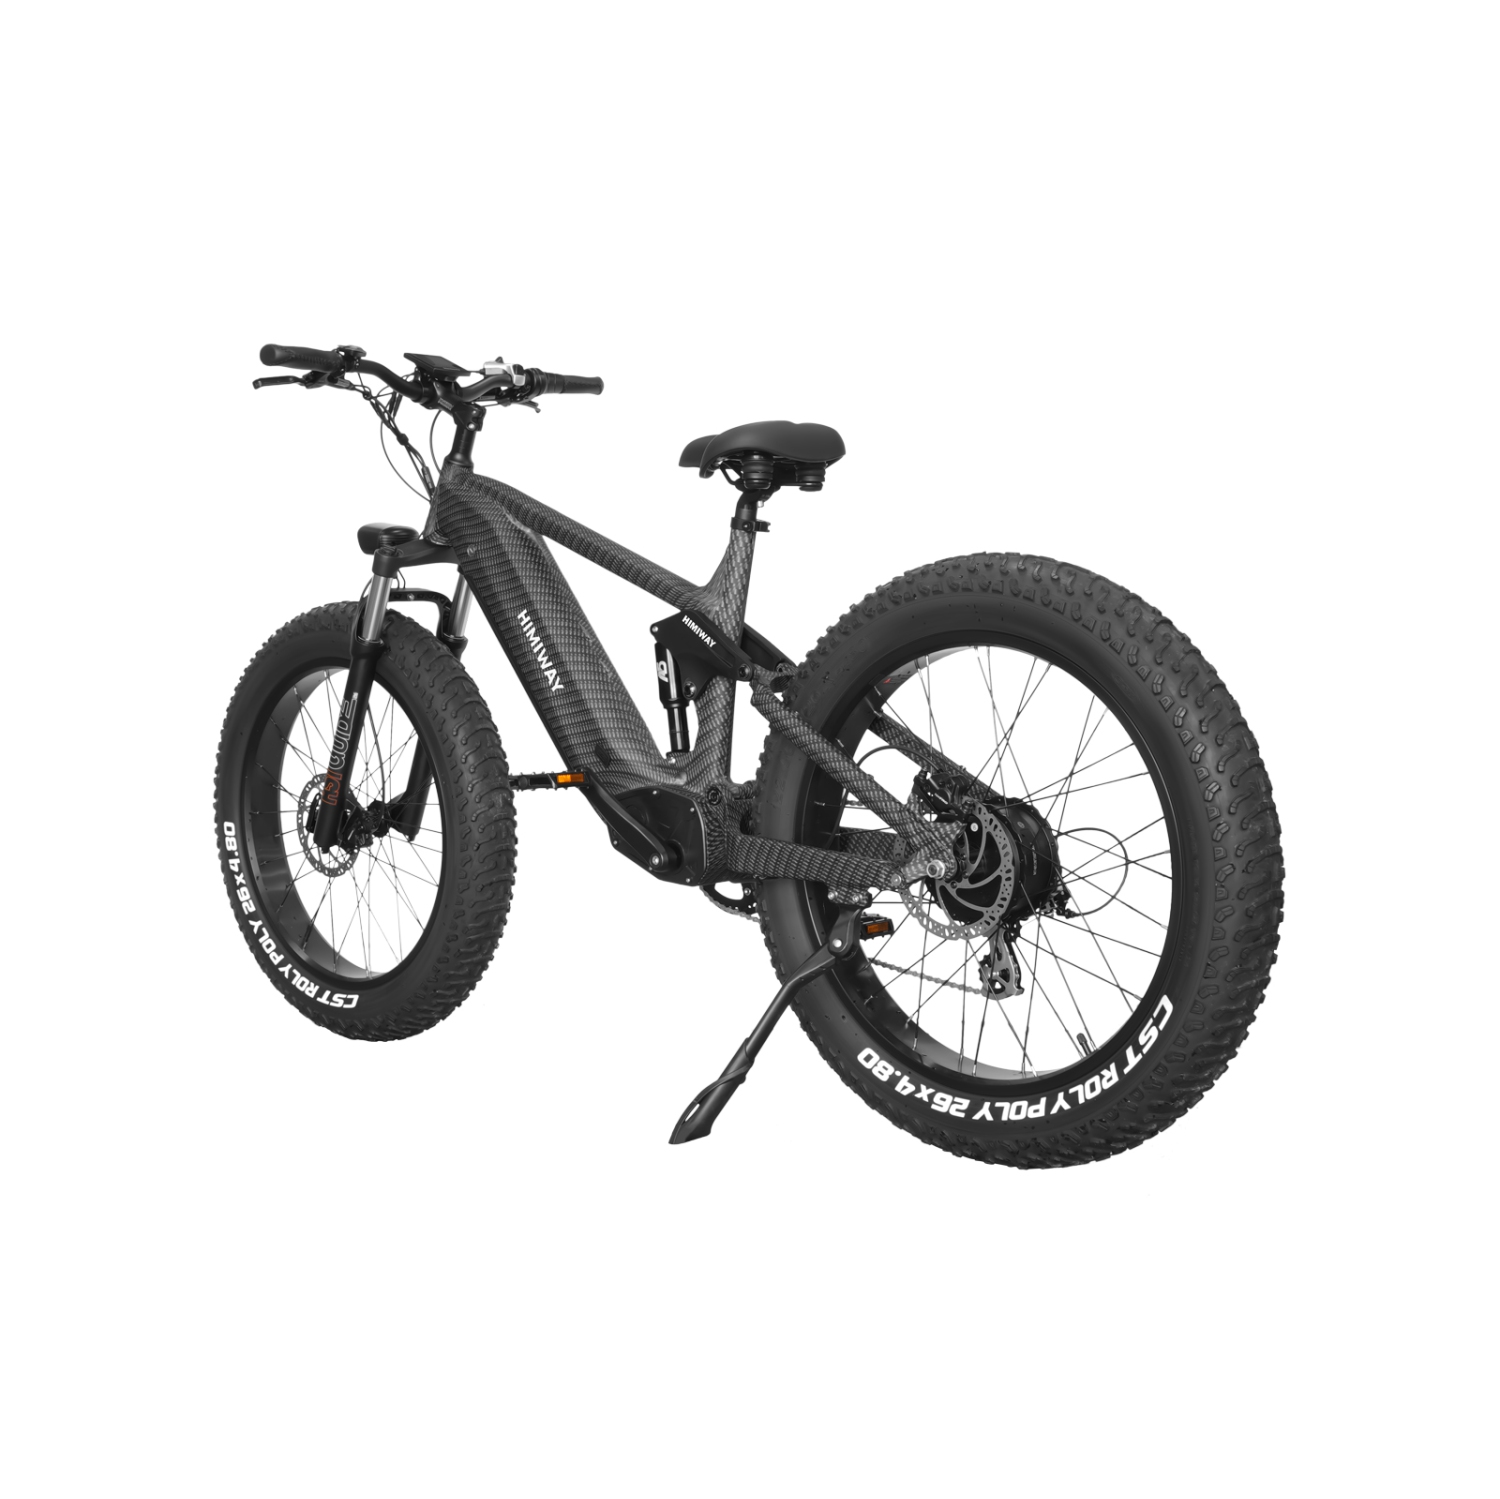 Himiway Cobra 750W E-Mountain Bike: 80-mile range, 25 MPH, 26"x4.8" fat tires, Four-Bar Linkage Suspension, 400lb Payload, 7-Speed System, King